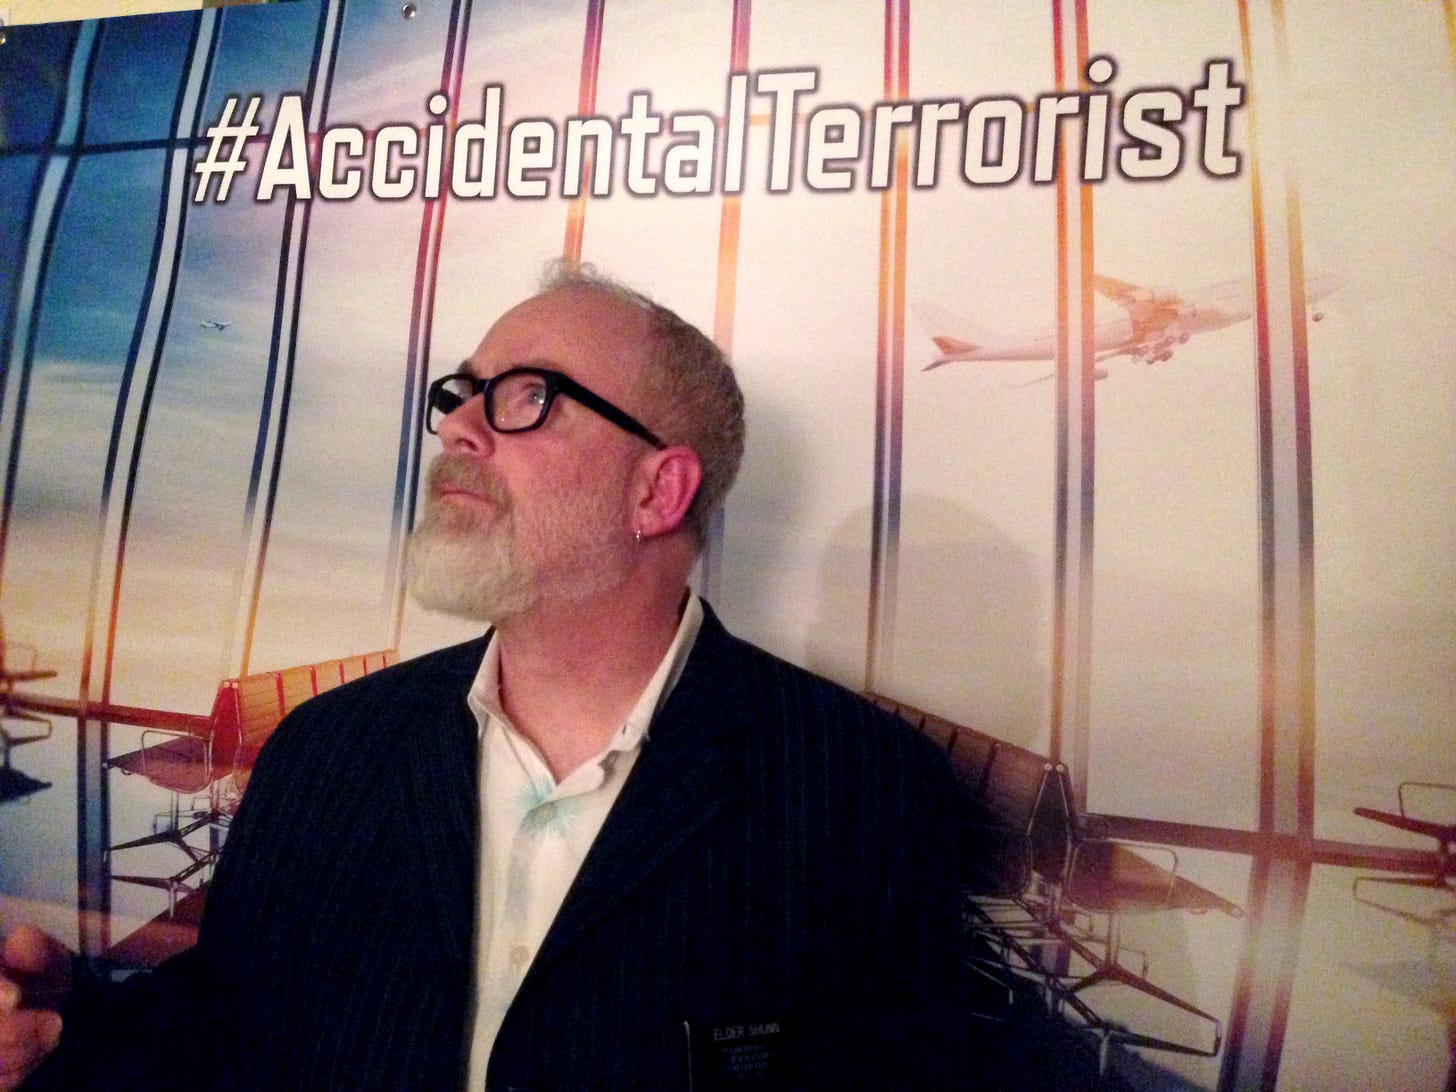 A bearded man wearing glasses and a blazer poses before a printed backdrop showing a stylized photograph of the inside of an airport departure terminal, with the hashtag #AccidentalTerrorist printed at the top.